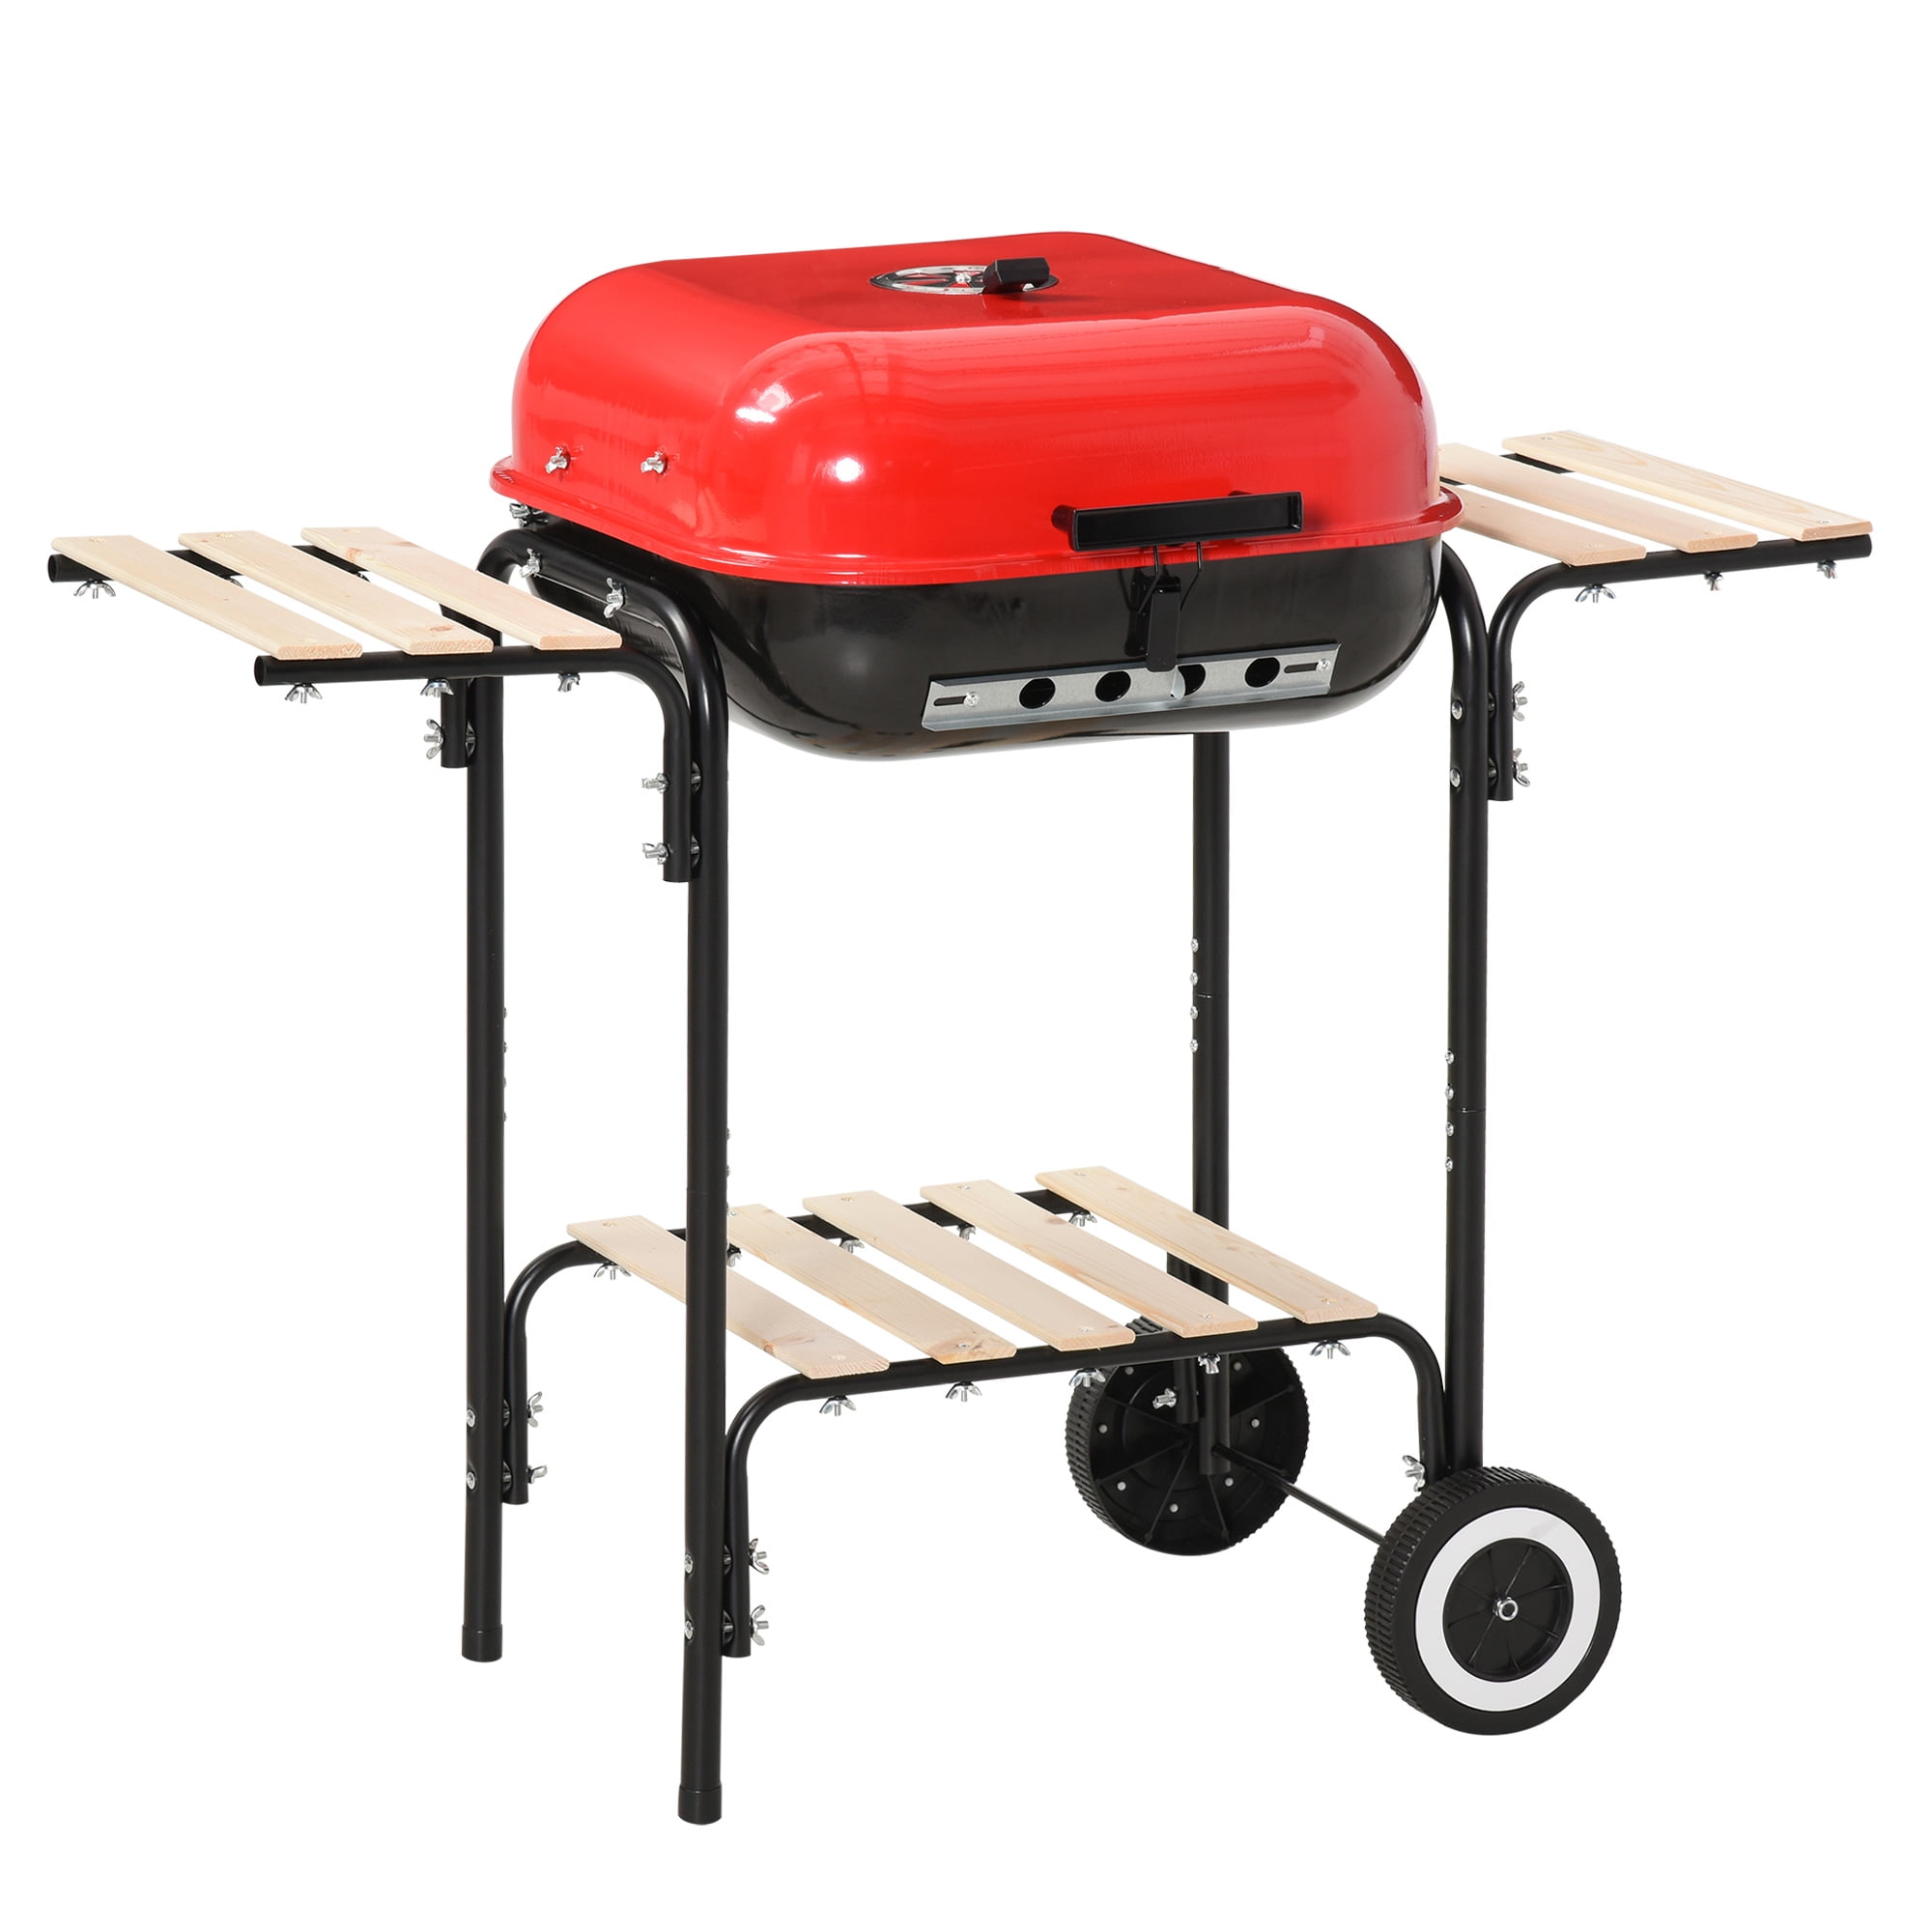 Outsunny Steel Porcelain Portable Outdoor Charcoal Barbecue Grill - Walmart.com